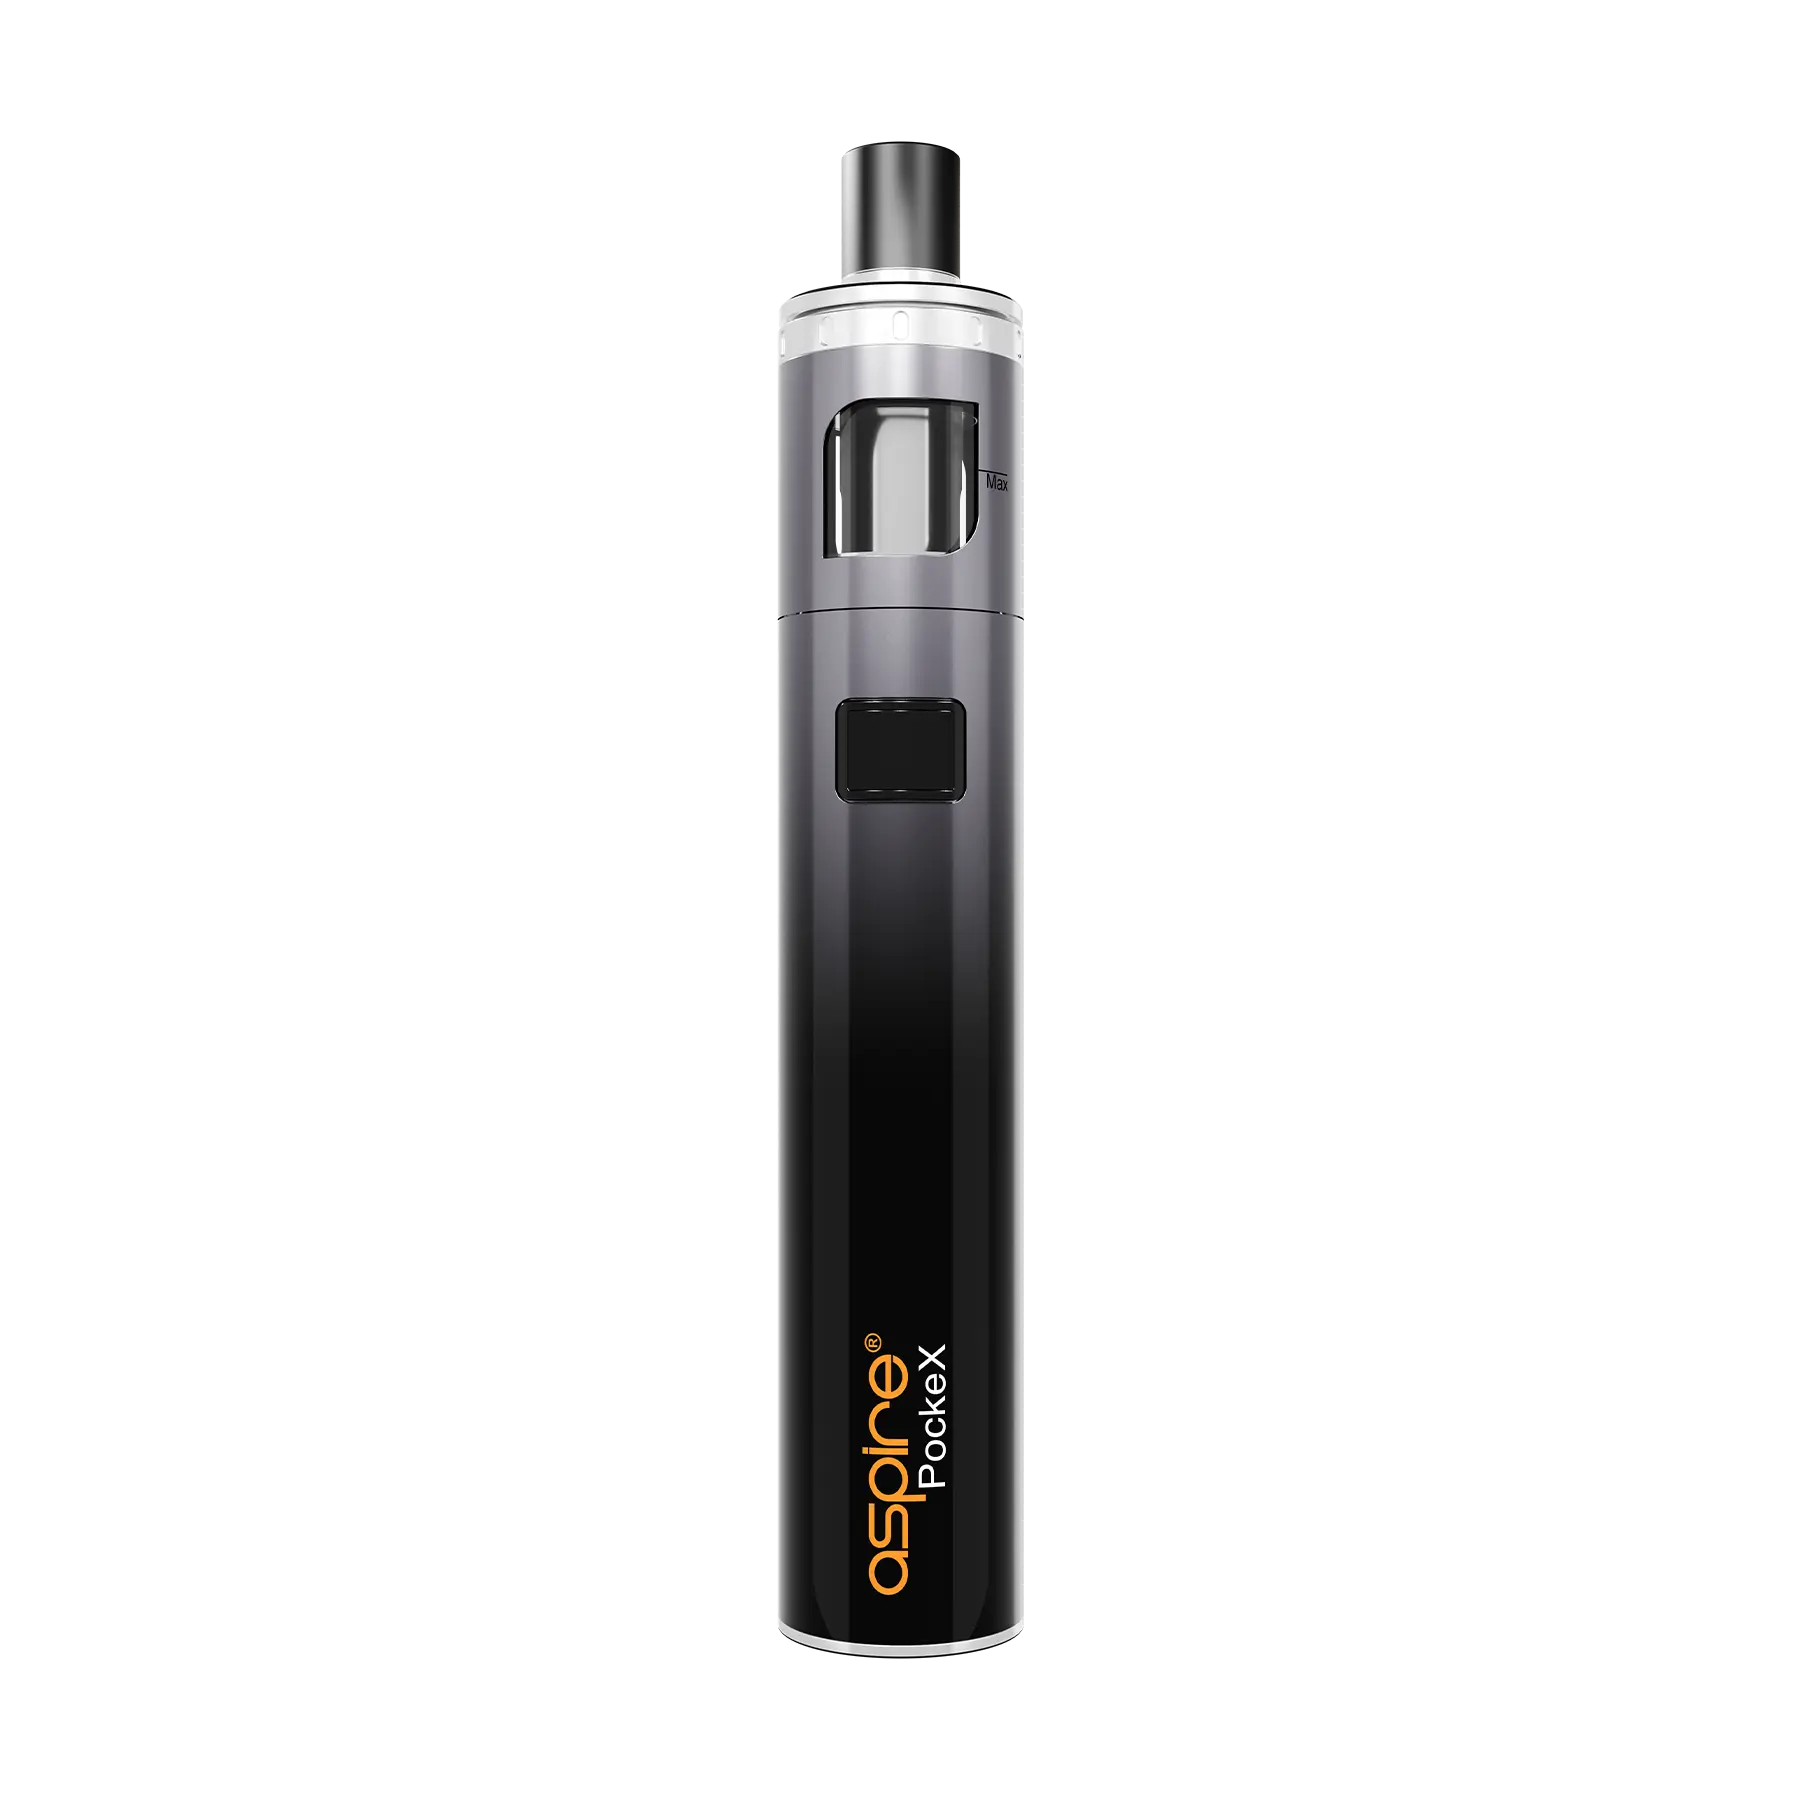 Aspire UK PockeX Anniversary Edition Mouth To Lung Kit - Grey Gradient